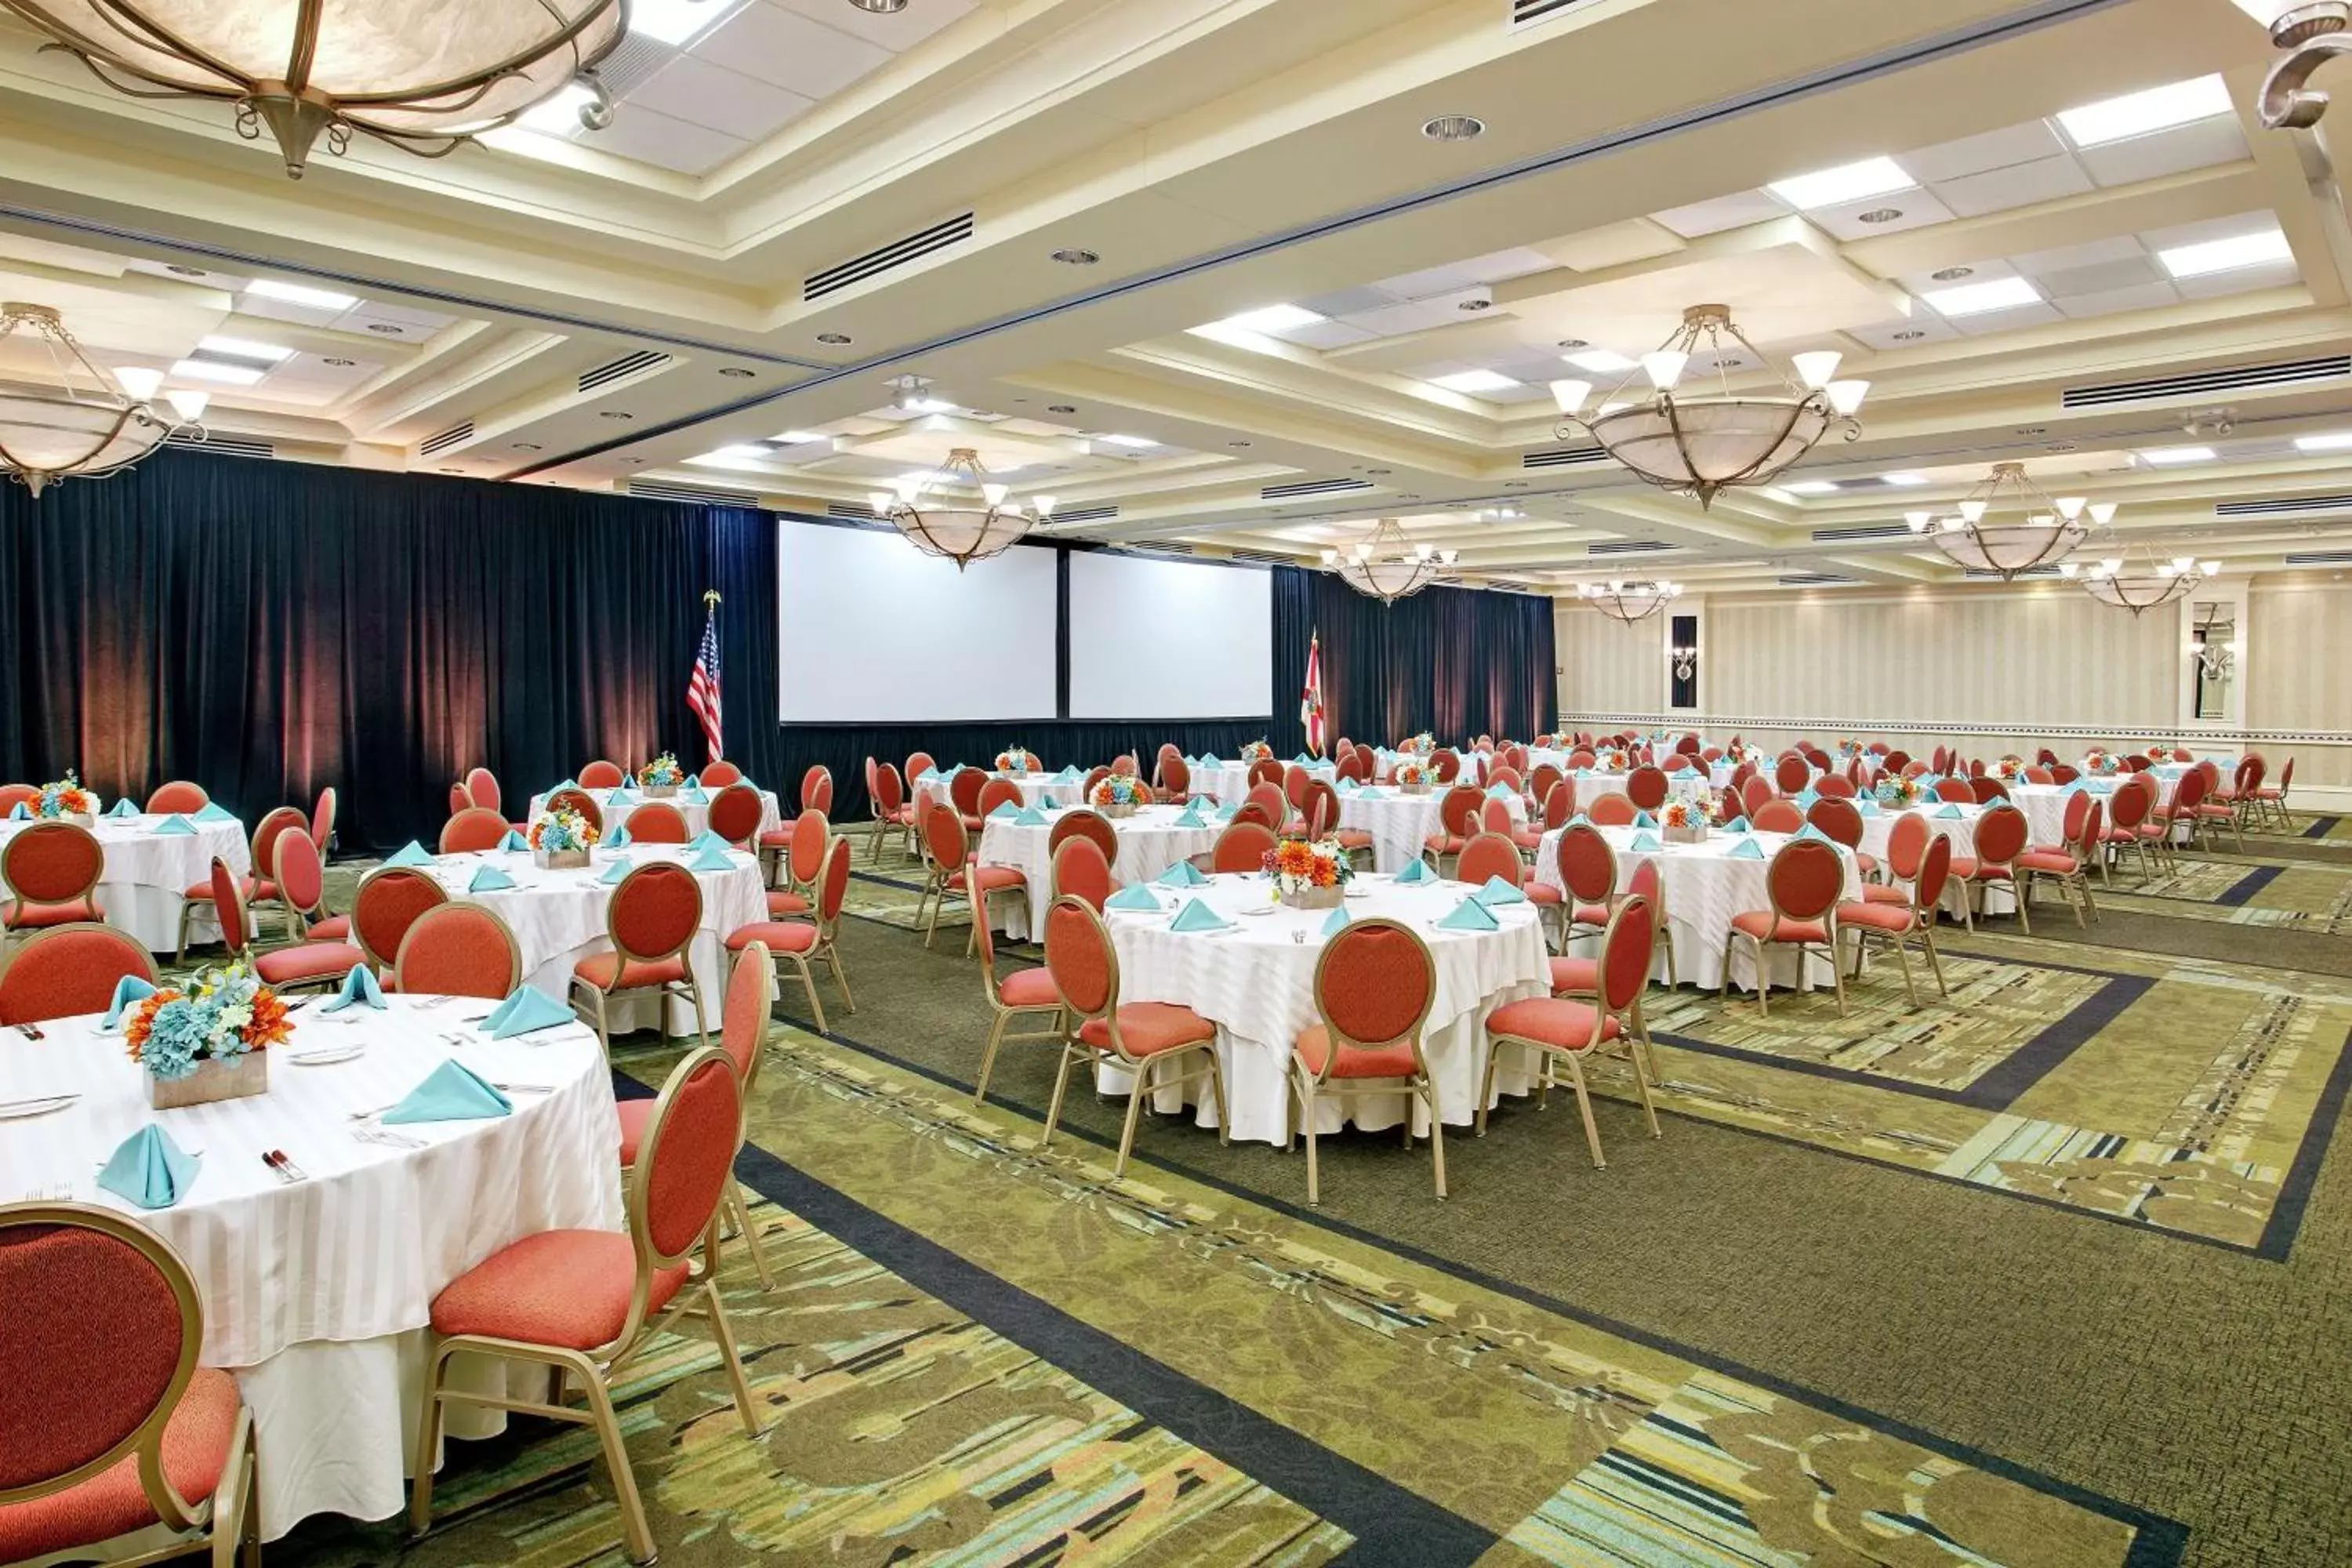 Meeting/conference room, Banquet Facilities in Hilton Naples